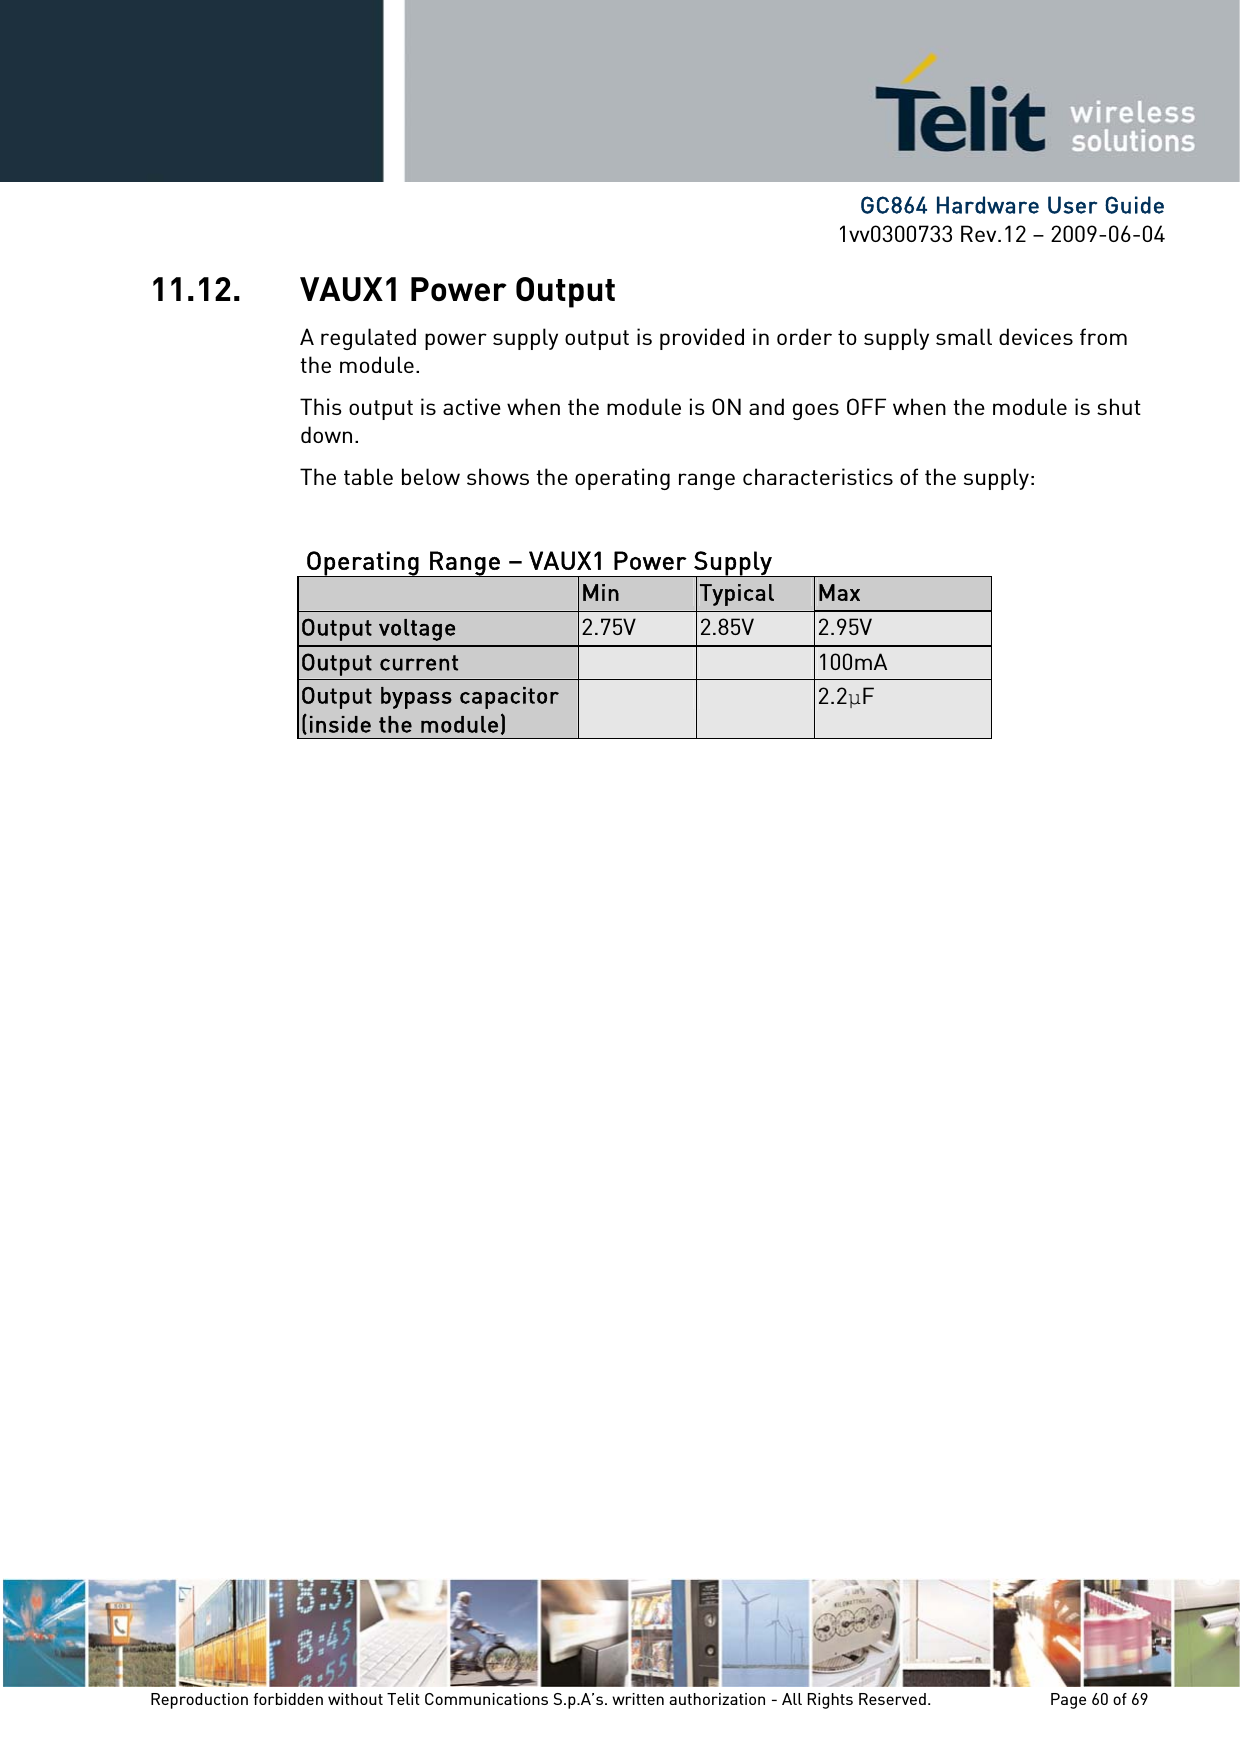      GC864 Hardware User Guide 1vv0300733 Rev.12 – 2009-06-04 11.12. VAUX1 Power Output A regulated power supply output is provided in order to supply small devices from the module. This output is active when the module is ON and goes OFF when the module is shut down. The table below shows the operating range characteristics of the supply:  Operating Range – VAUX1 Power Supply   Min  Typical  Max Output voltage  2.75V  2.85V  2.95V Output current    100mA Output bypass capacitor (inside the module)   2.2F Reproduction forbidden without Telit Communications S.p.A’s. written authorization - All Rights Reserved.    Page 60 of 69  